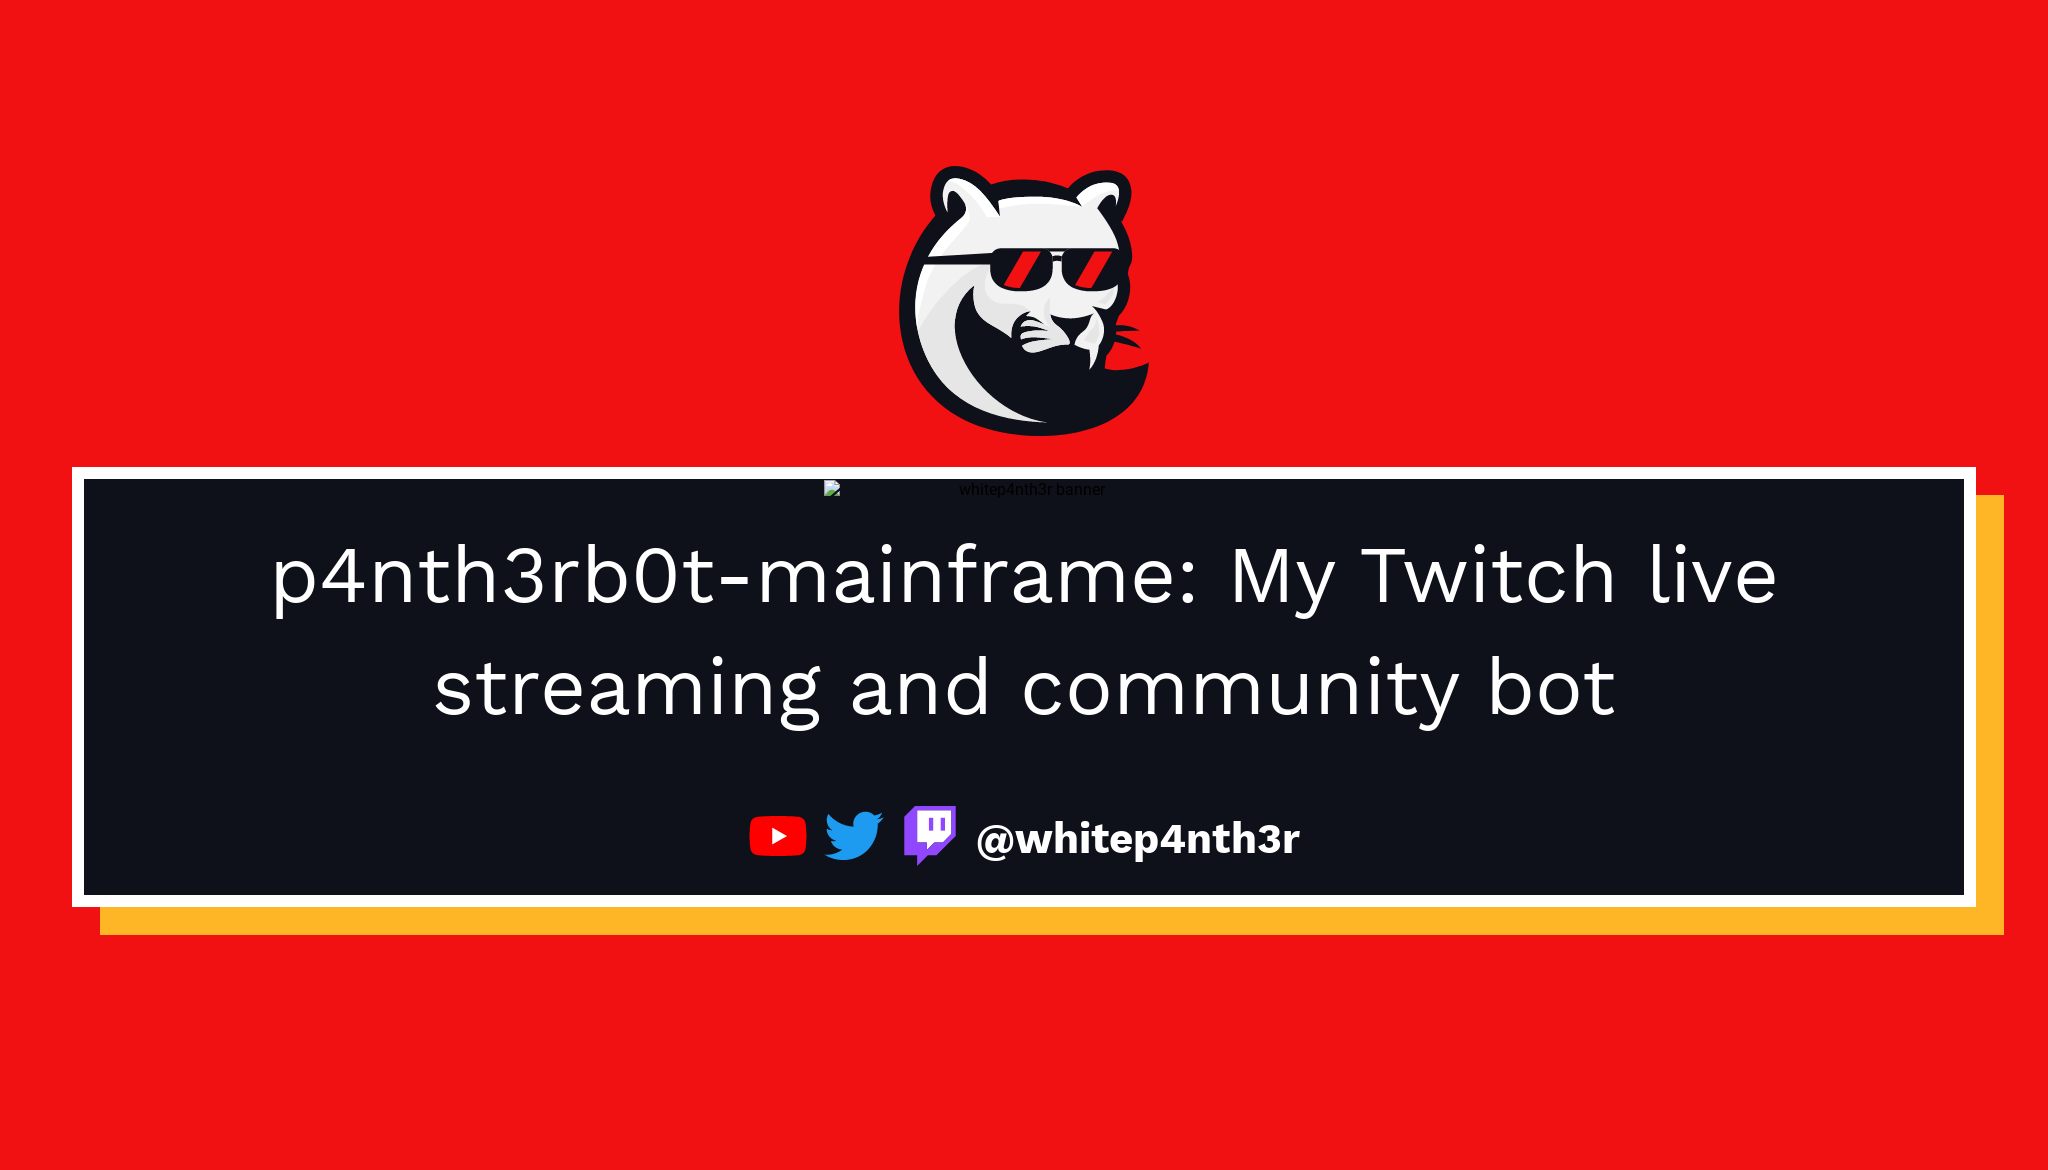 p4nth3rb0t-mainframe: My Twitch live streaming and community bot